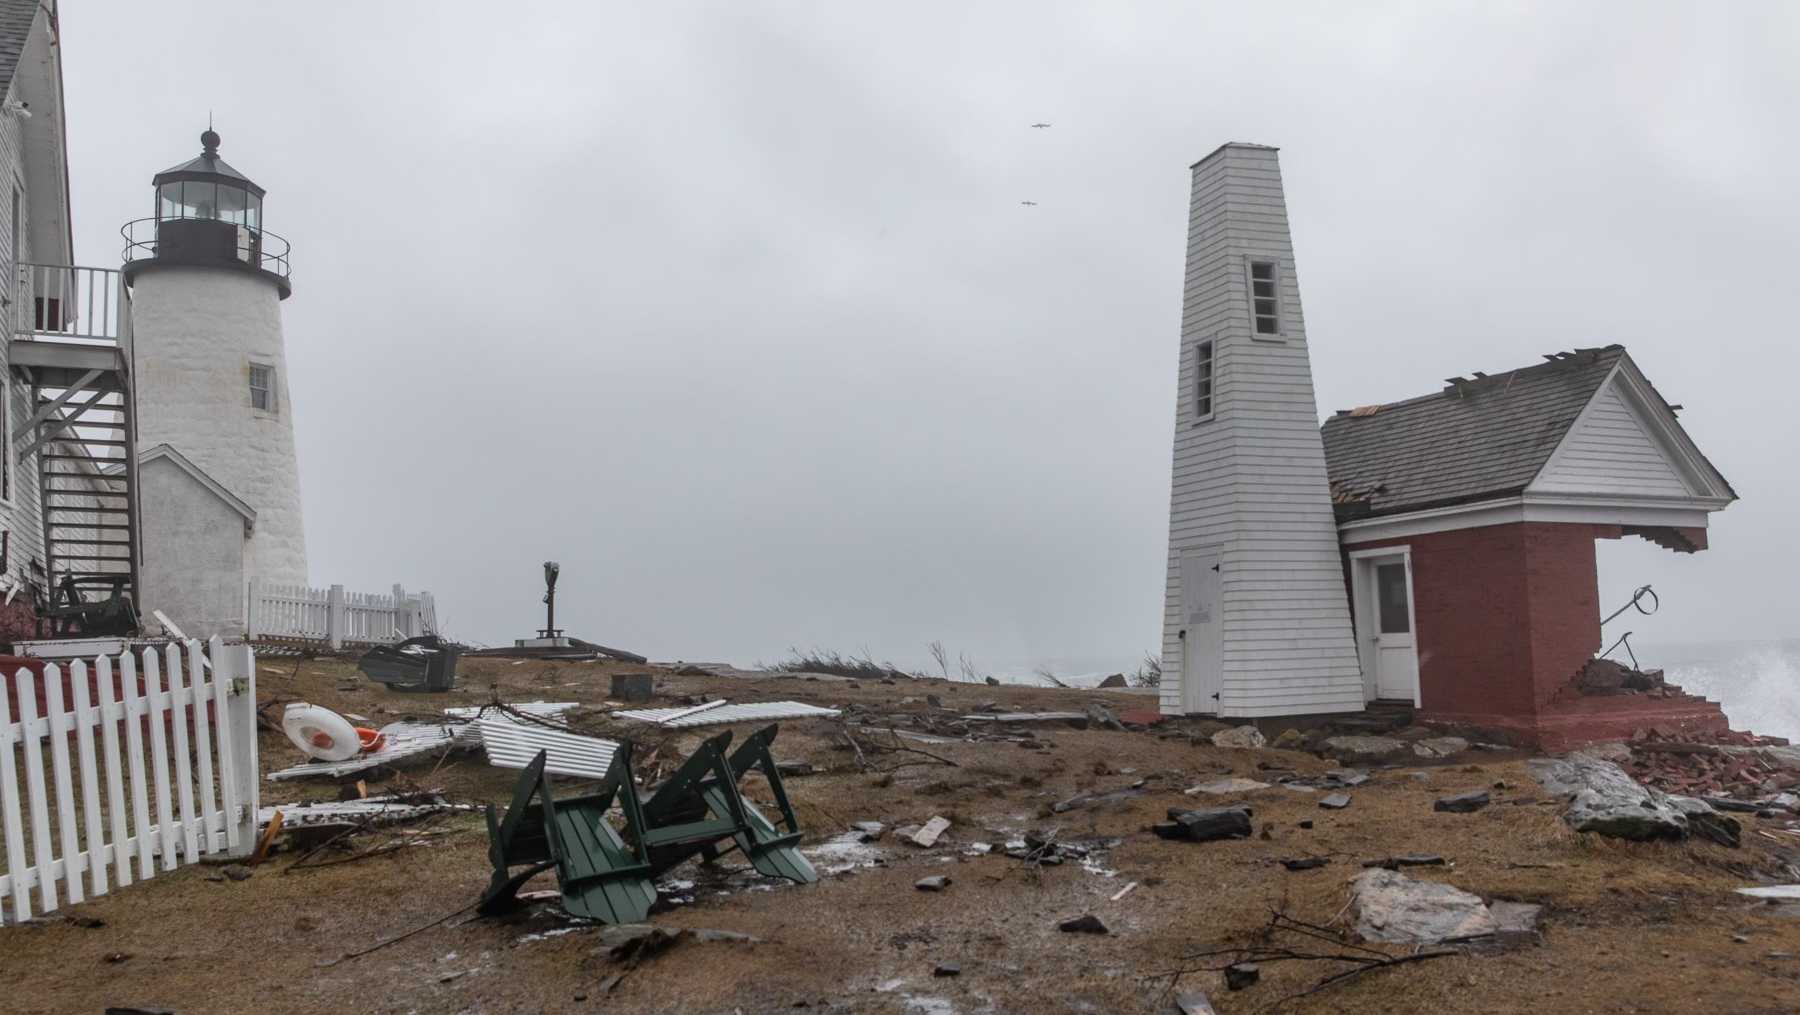 Repairs underway at iconic Maine lighthouse damaged in winter storm